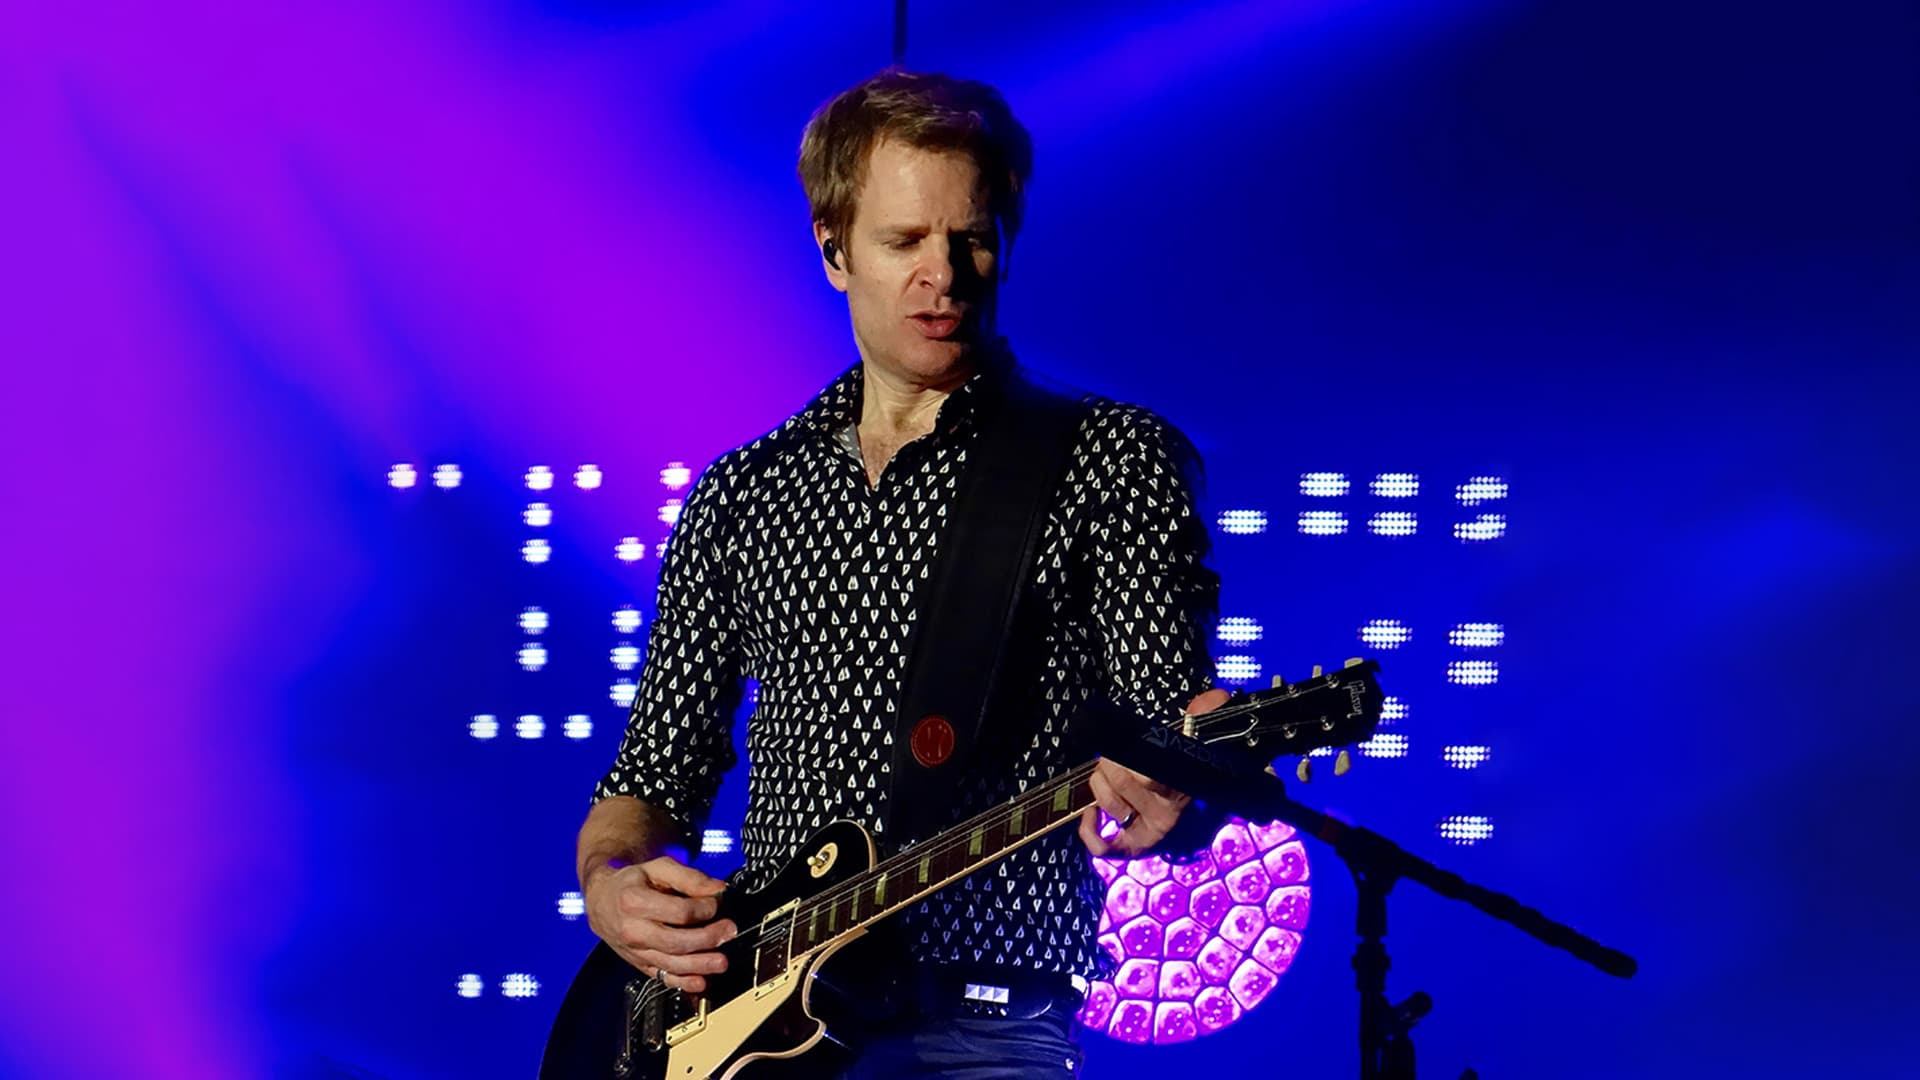 Image of Dom Brown, lead guitarist for Duran Duran, frequent user of Dirac Live